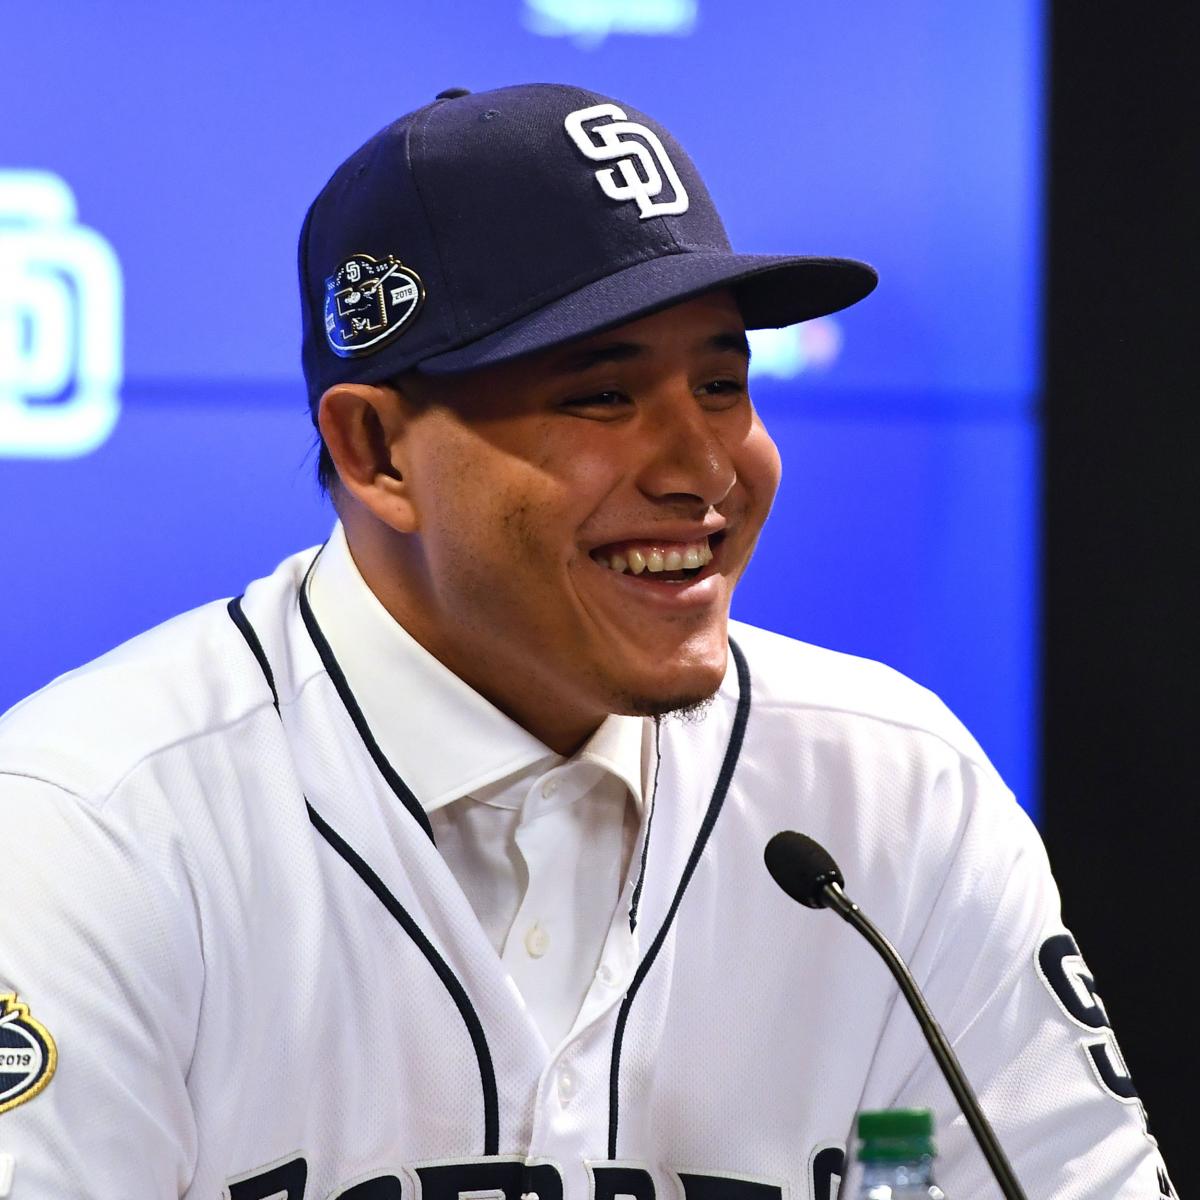 Manny Machado's dad says his son isn't going to land where everyone thinks  – New York Daily News